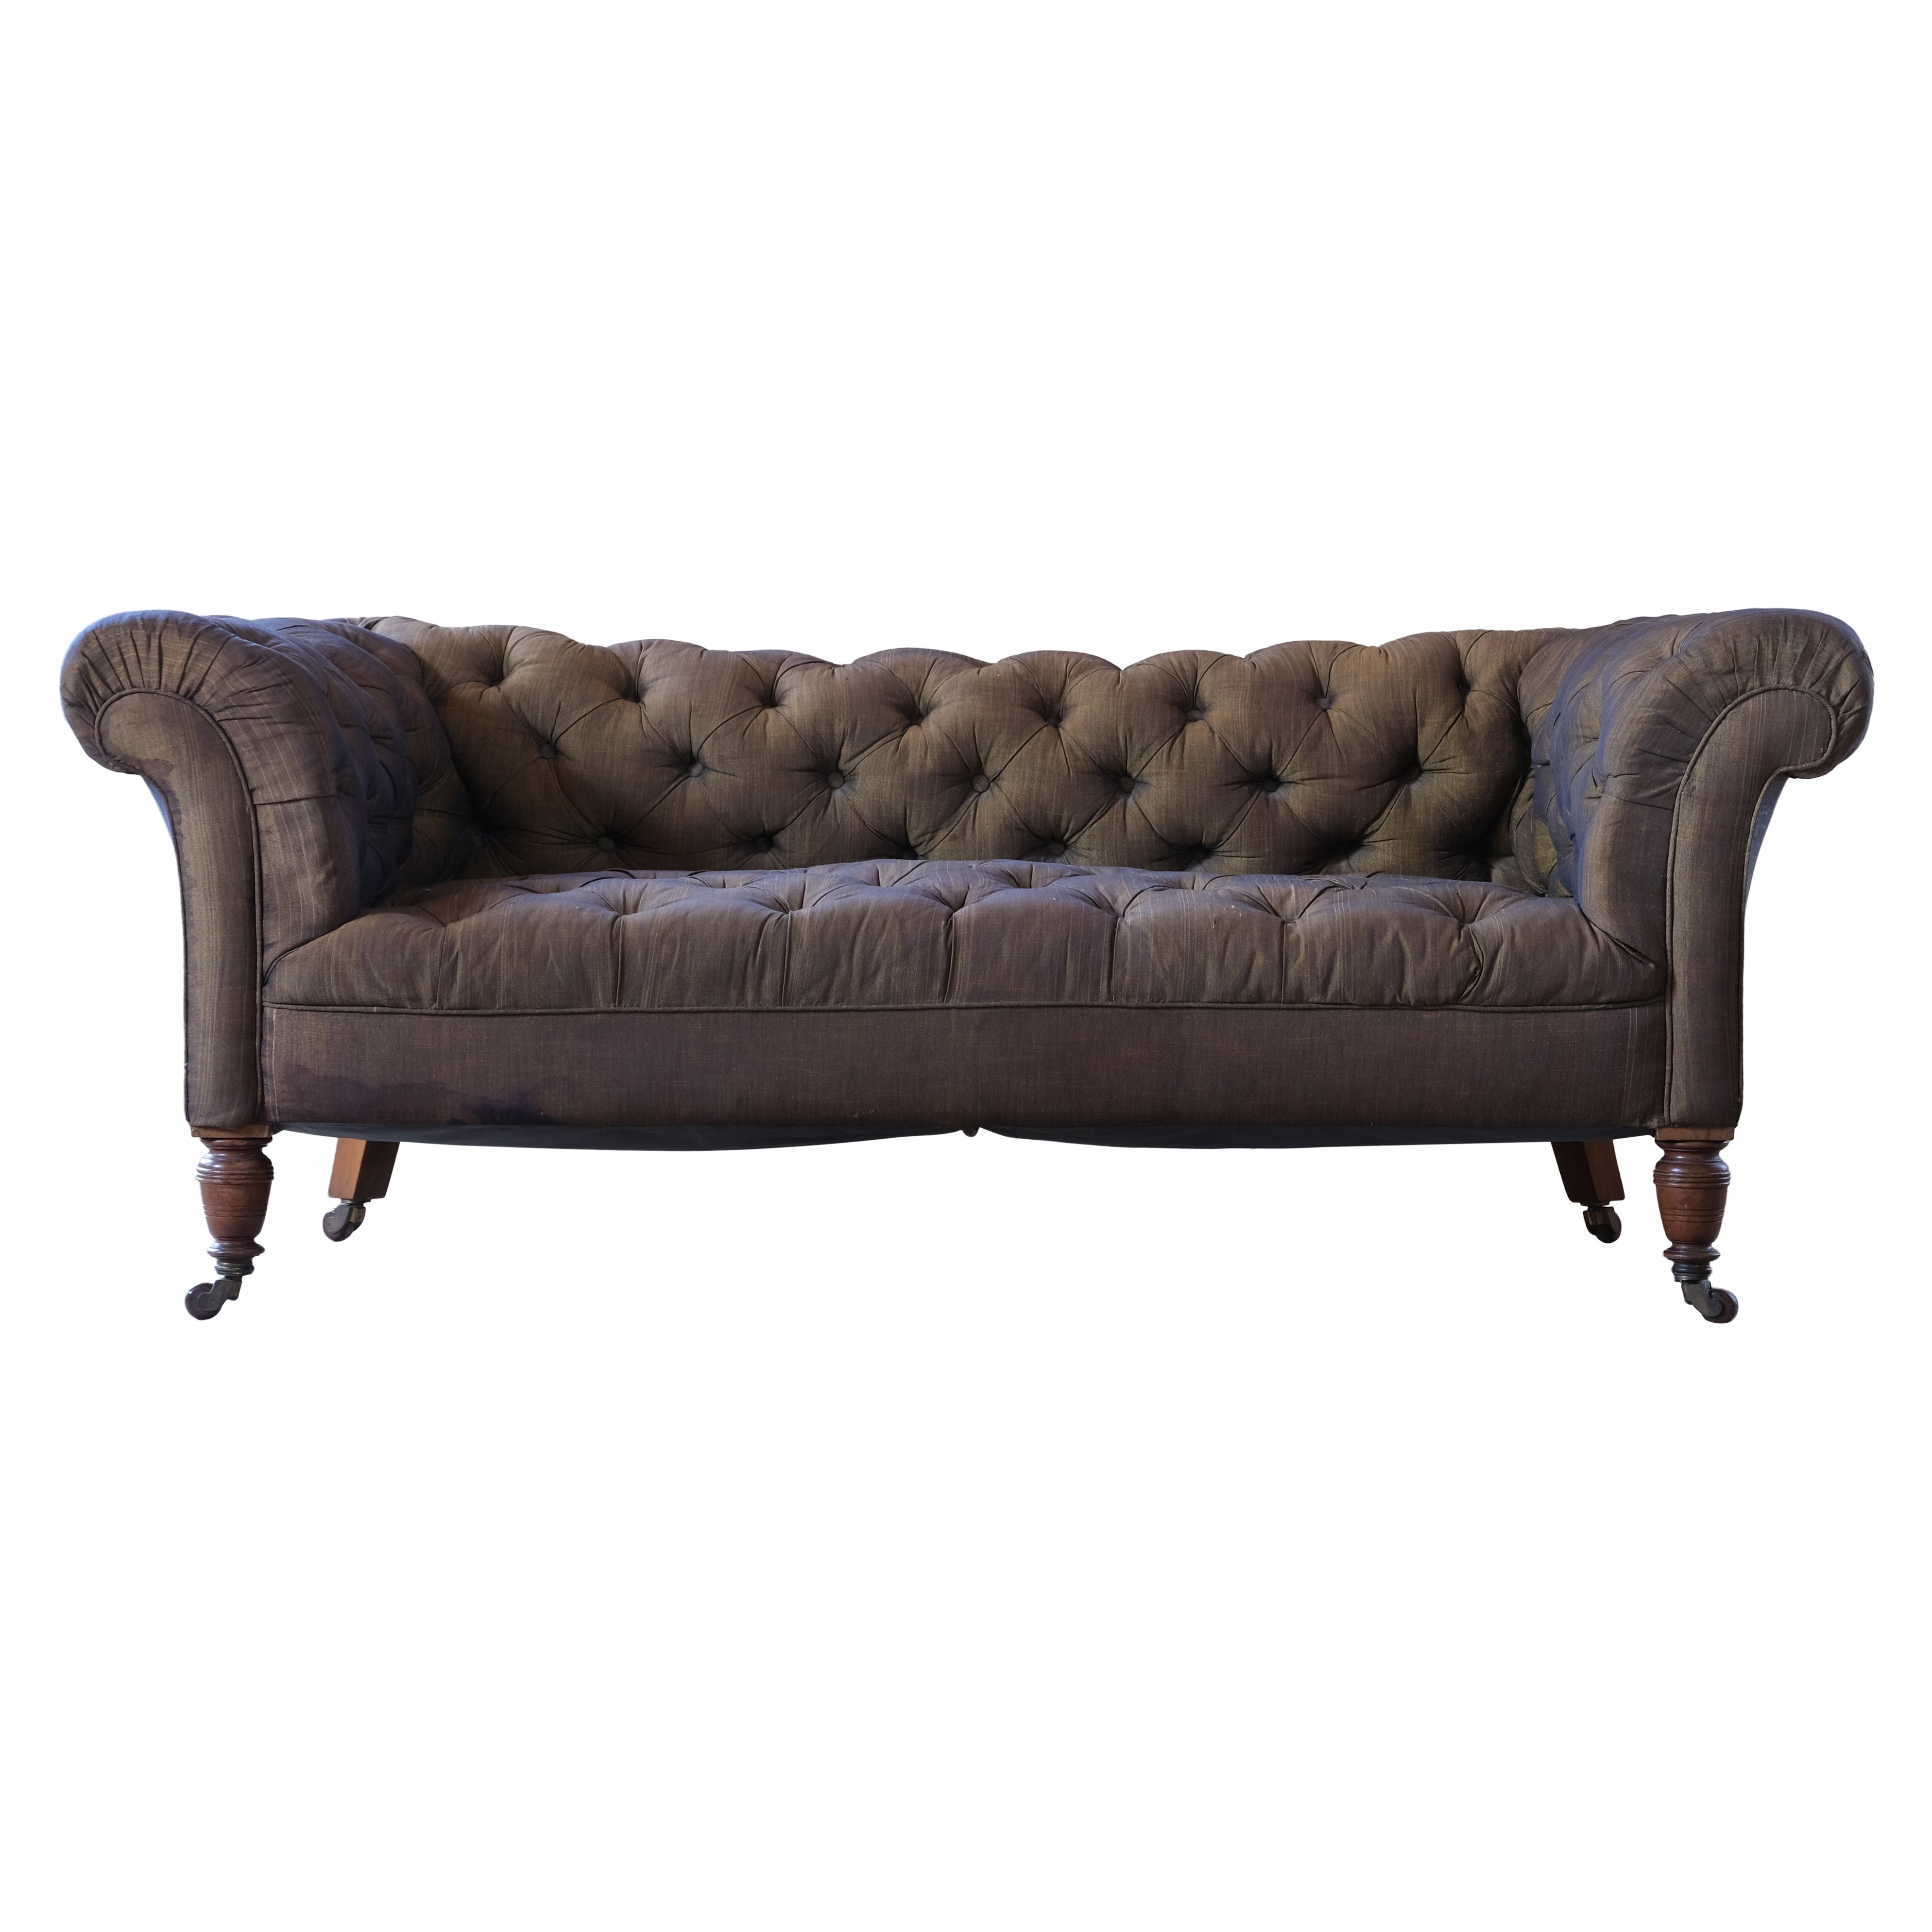 19th Century Chesterfield Sofa by Hampton and Sons, London